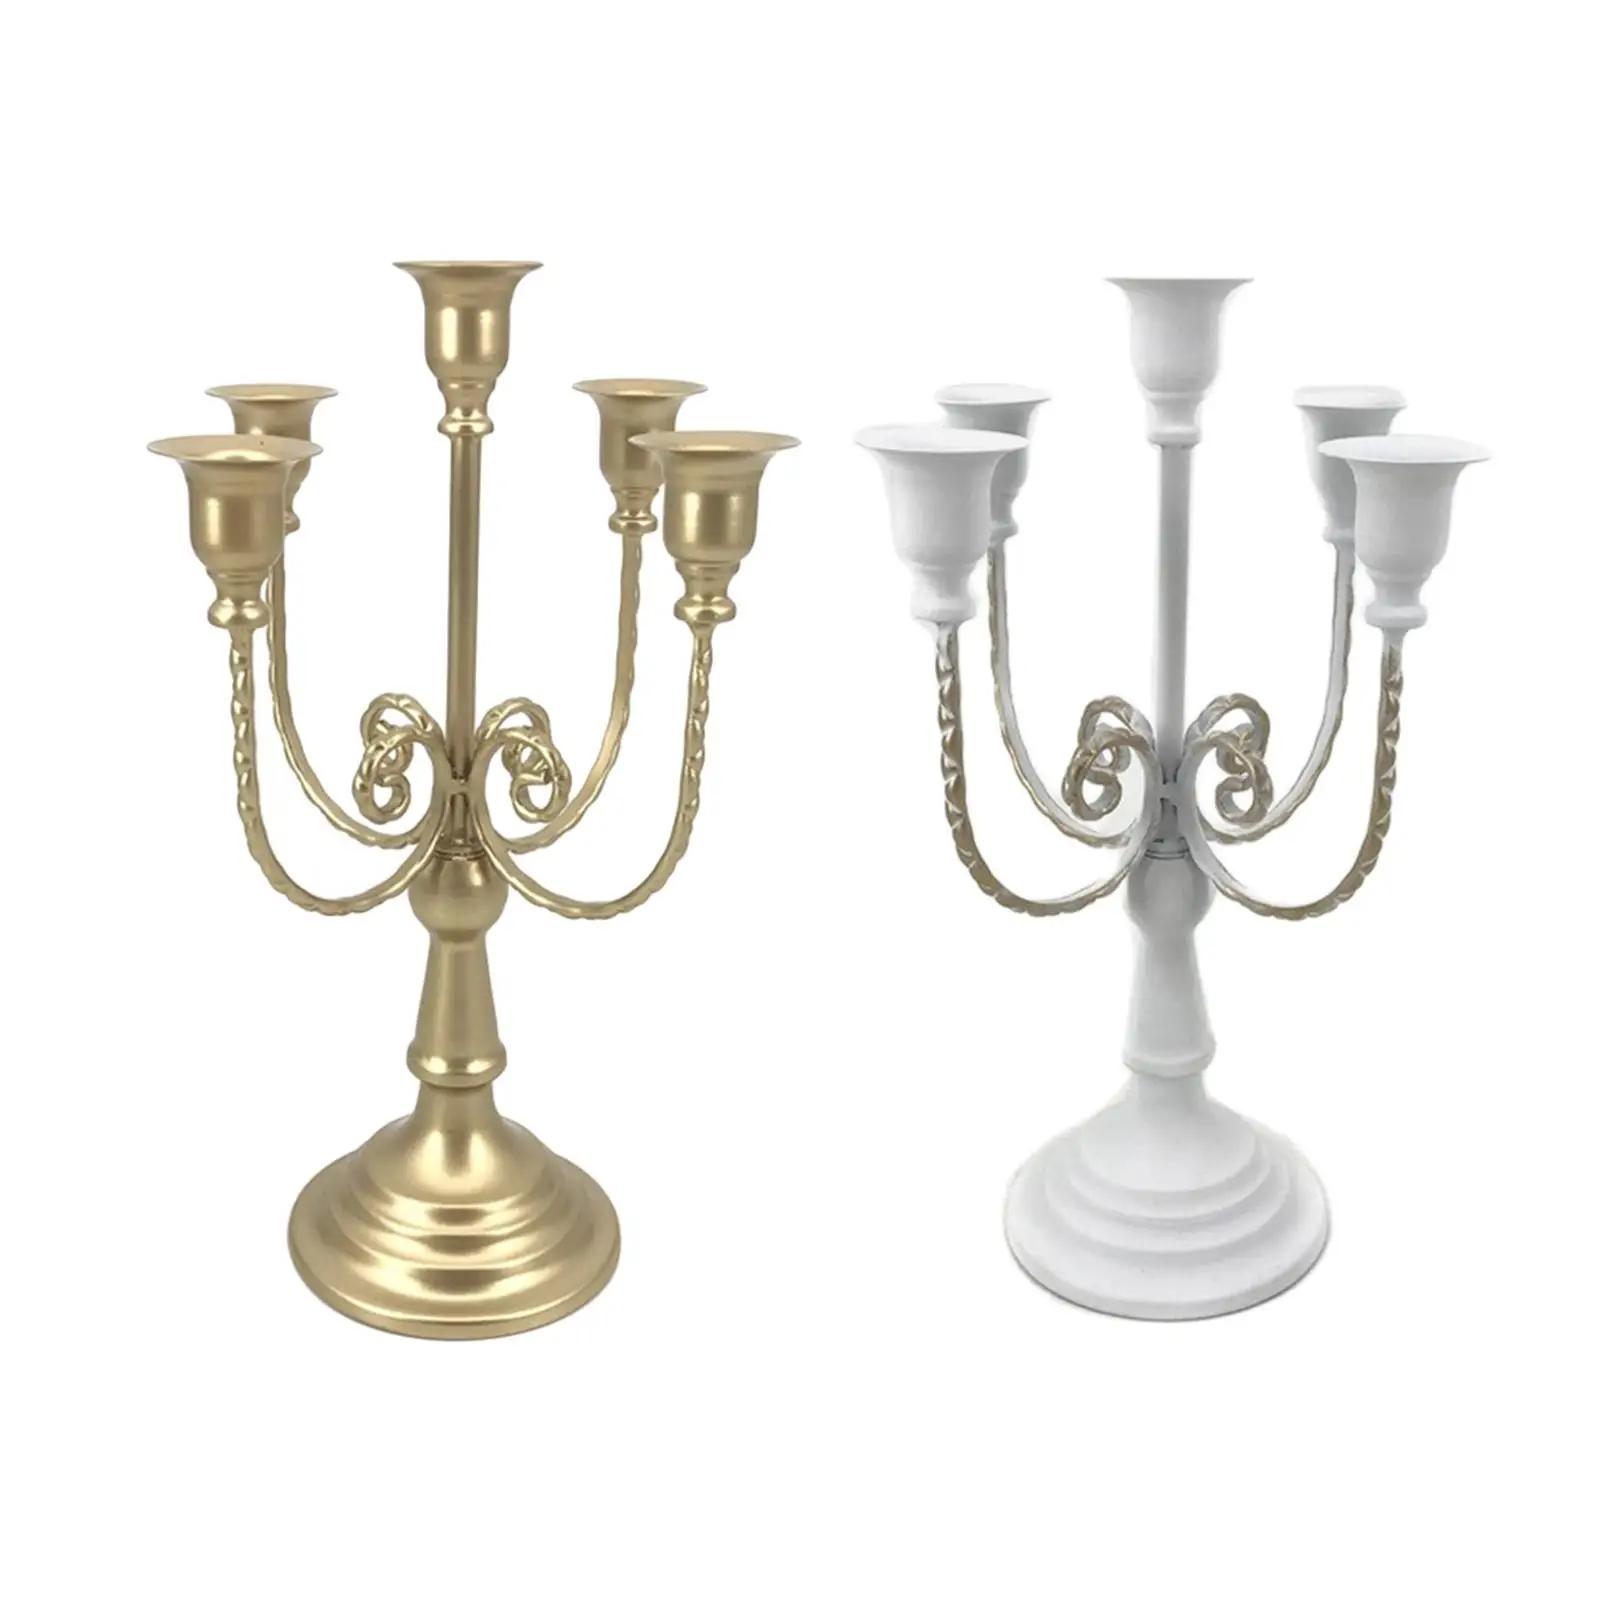 5 Headed Metal Candle Holder Candelabra Centerpiece Gift Decorative Pillar Stand Ornament for Wedding Parties Table Dinner Event